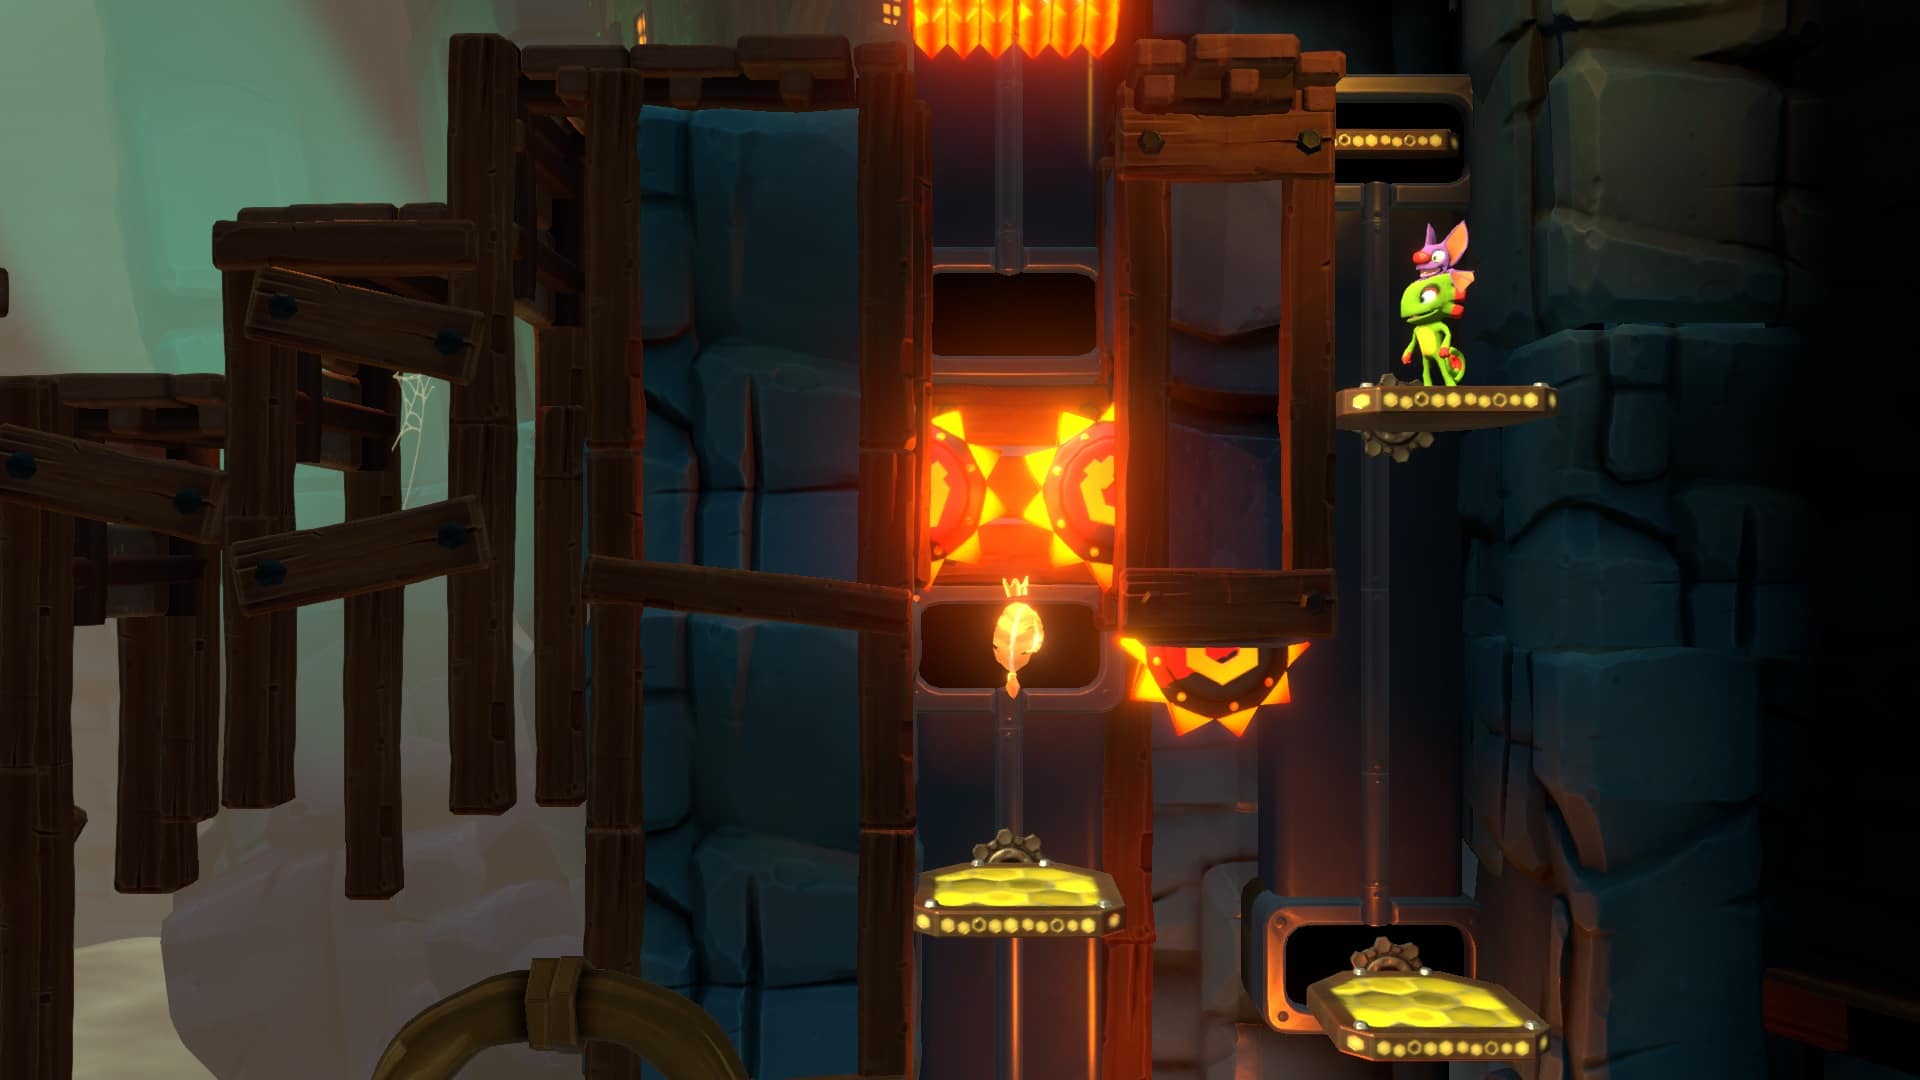 Yooka laylee and the impossible lair level design